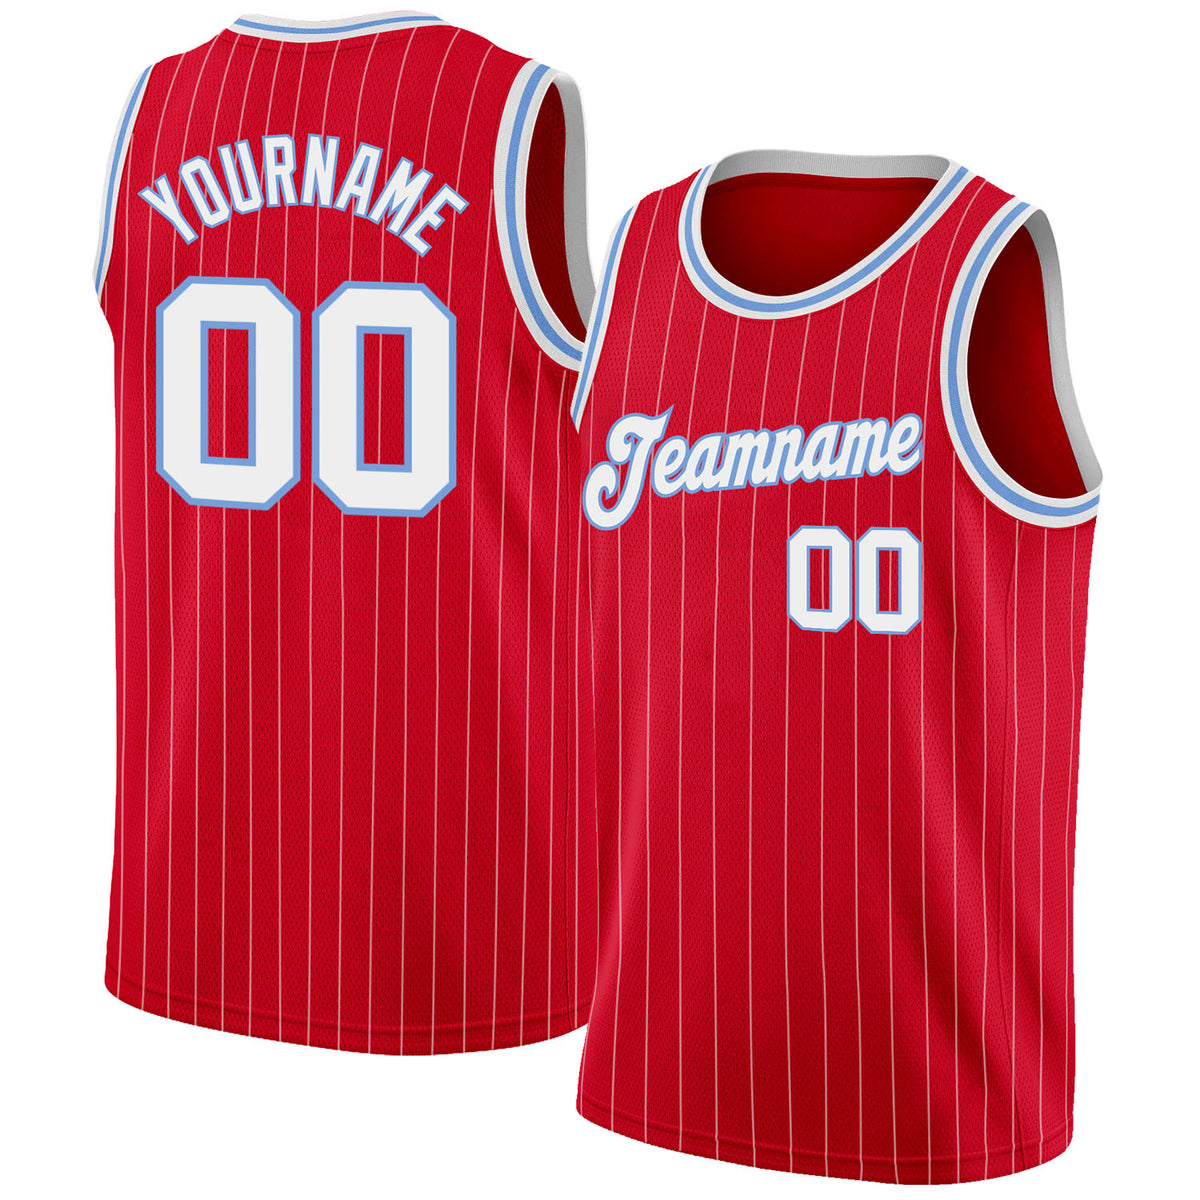 Custom Light Blue White Pinstripe Red-Navy Authentic Basketball Jersey  Discount